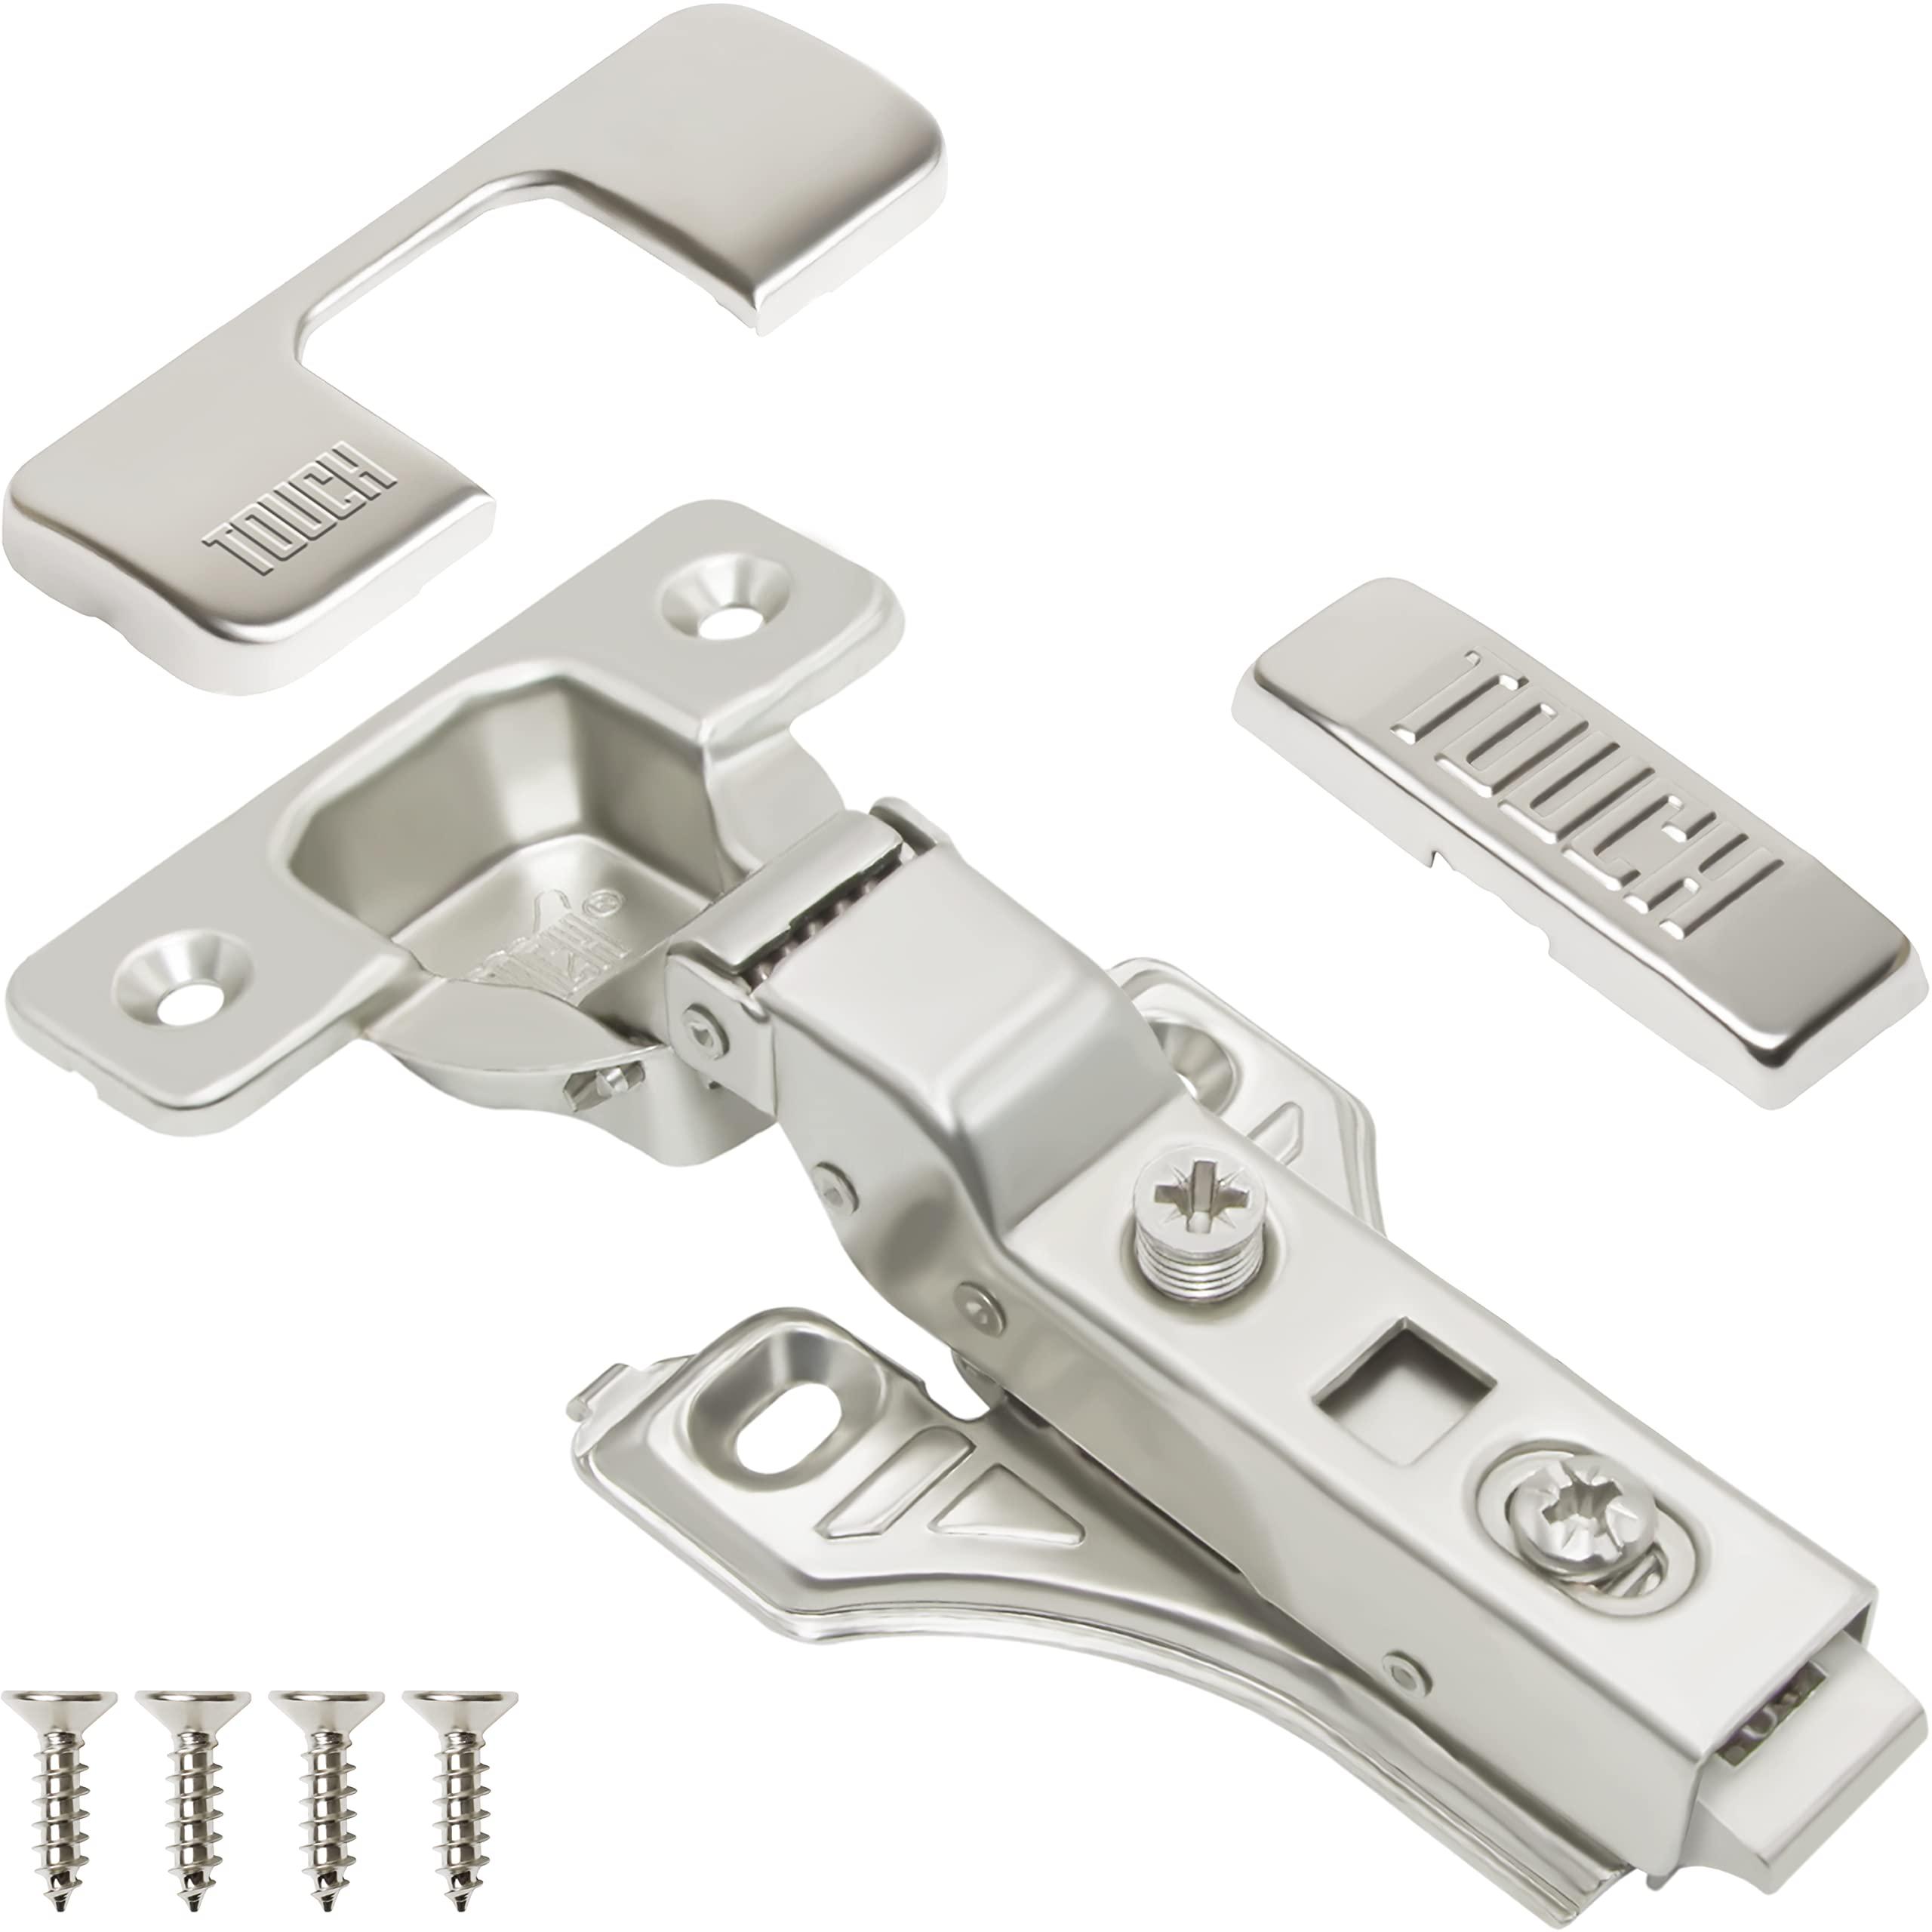 touch cabinet hinges (1 pair, 2 pcs) face frame cupboard door soft close hinges 3/8" inch half overlay concealed european cli